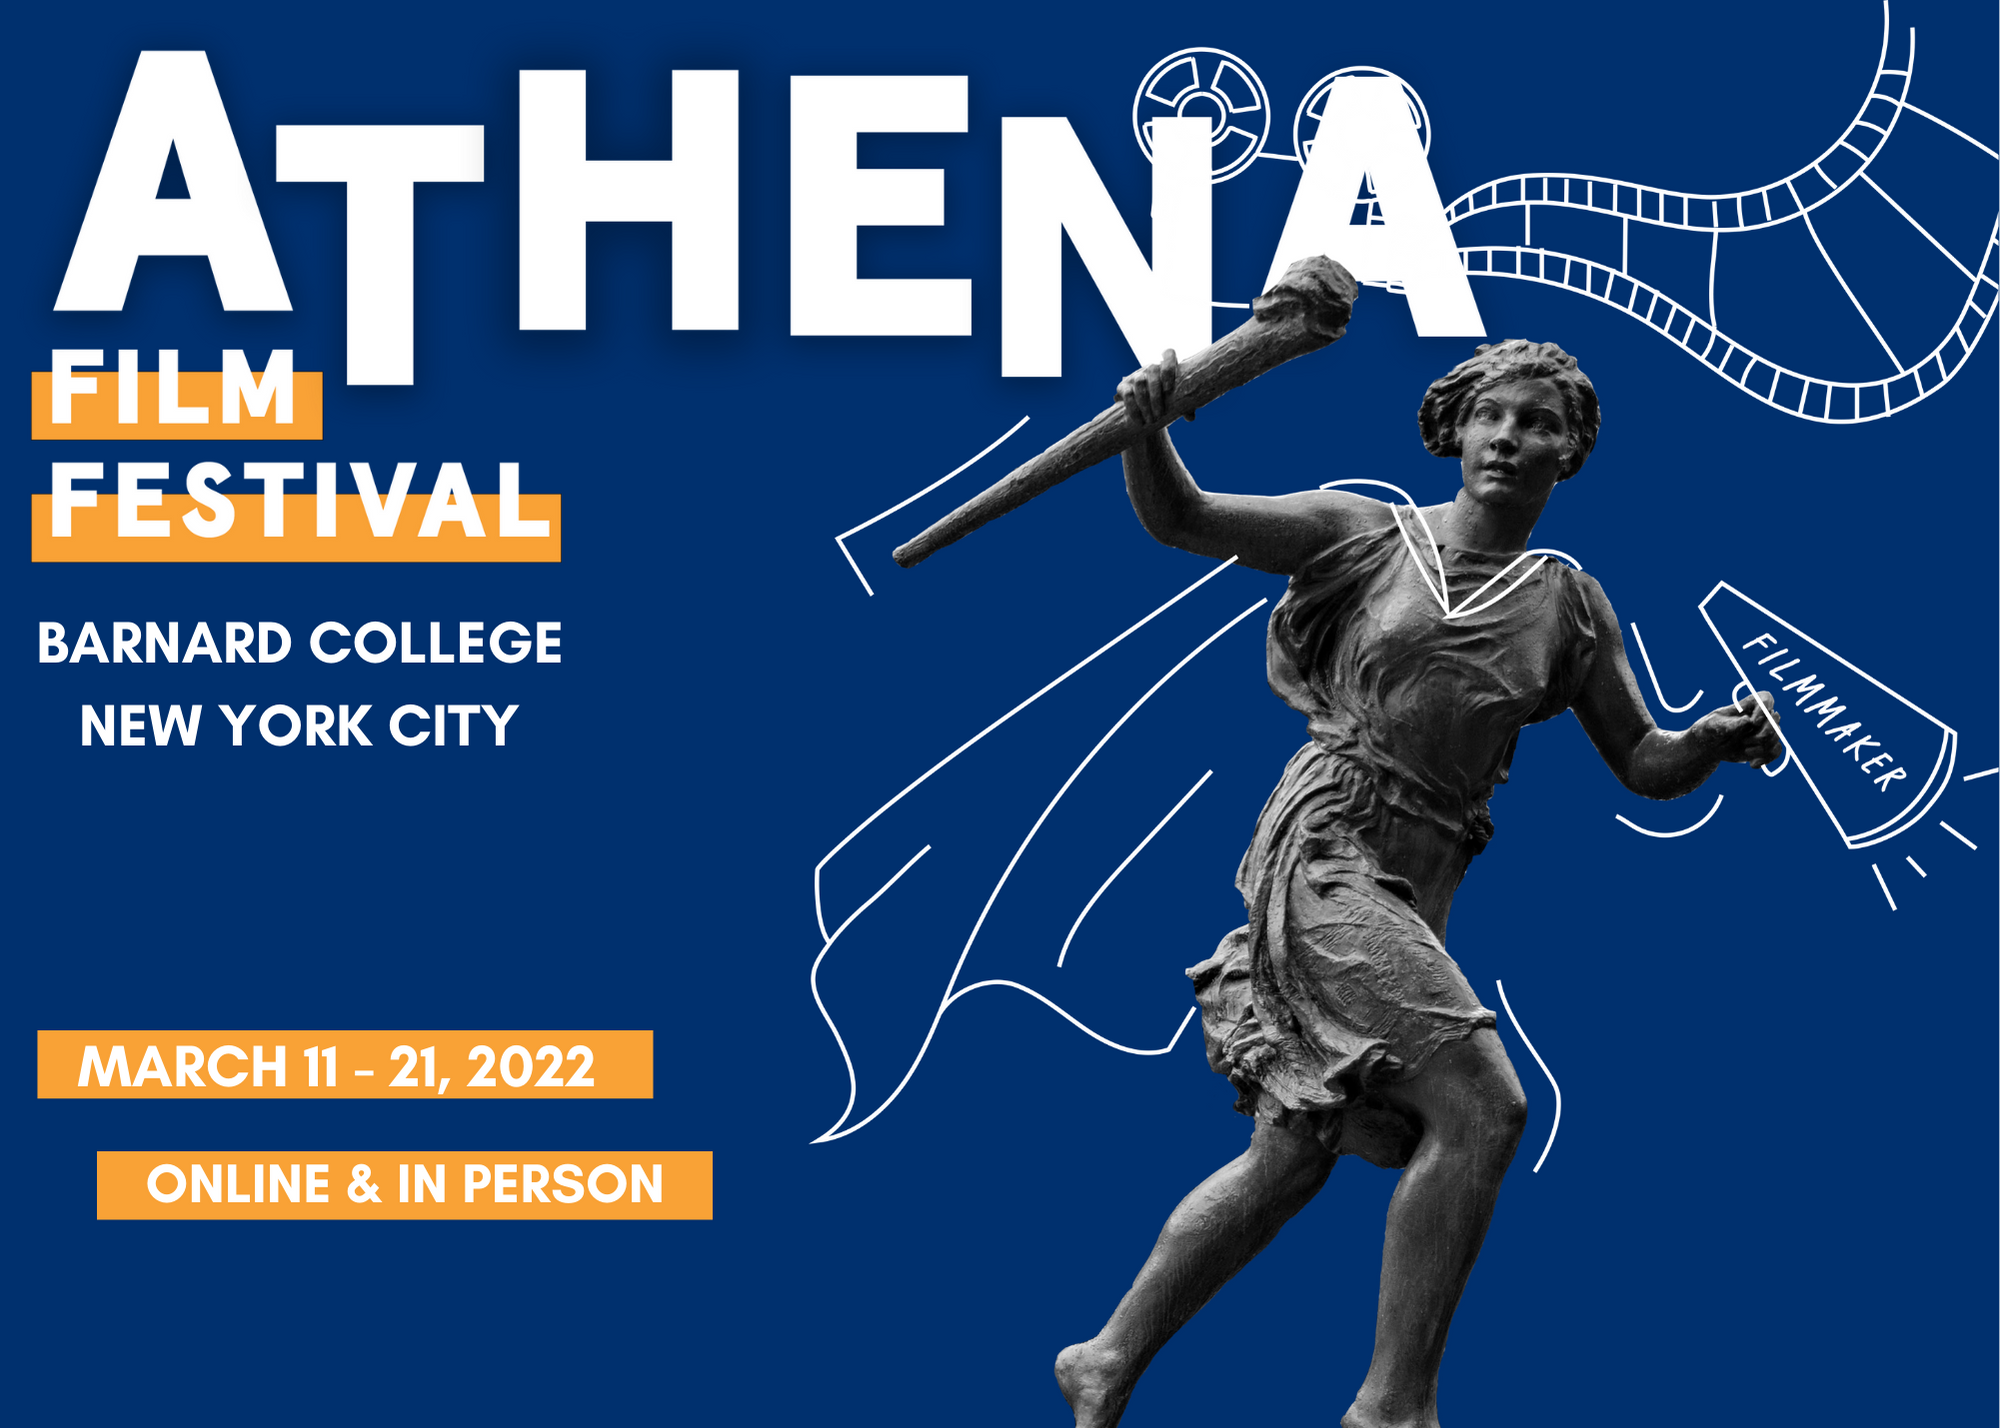 Save the Date Image for Athena Film Festival 2022: March 11 - 21, 2022